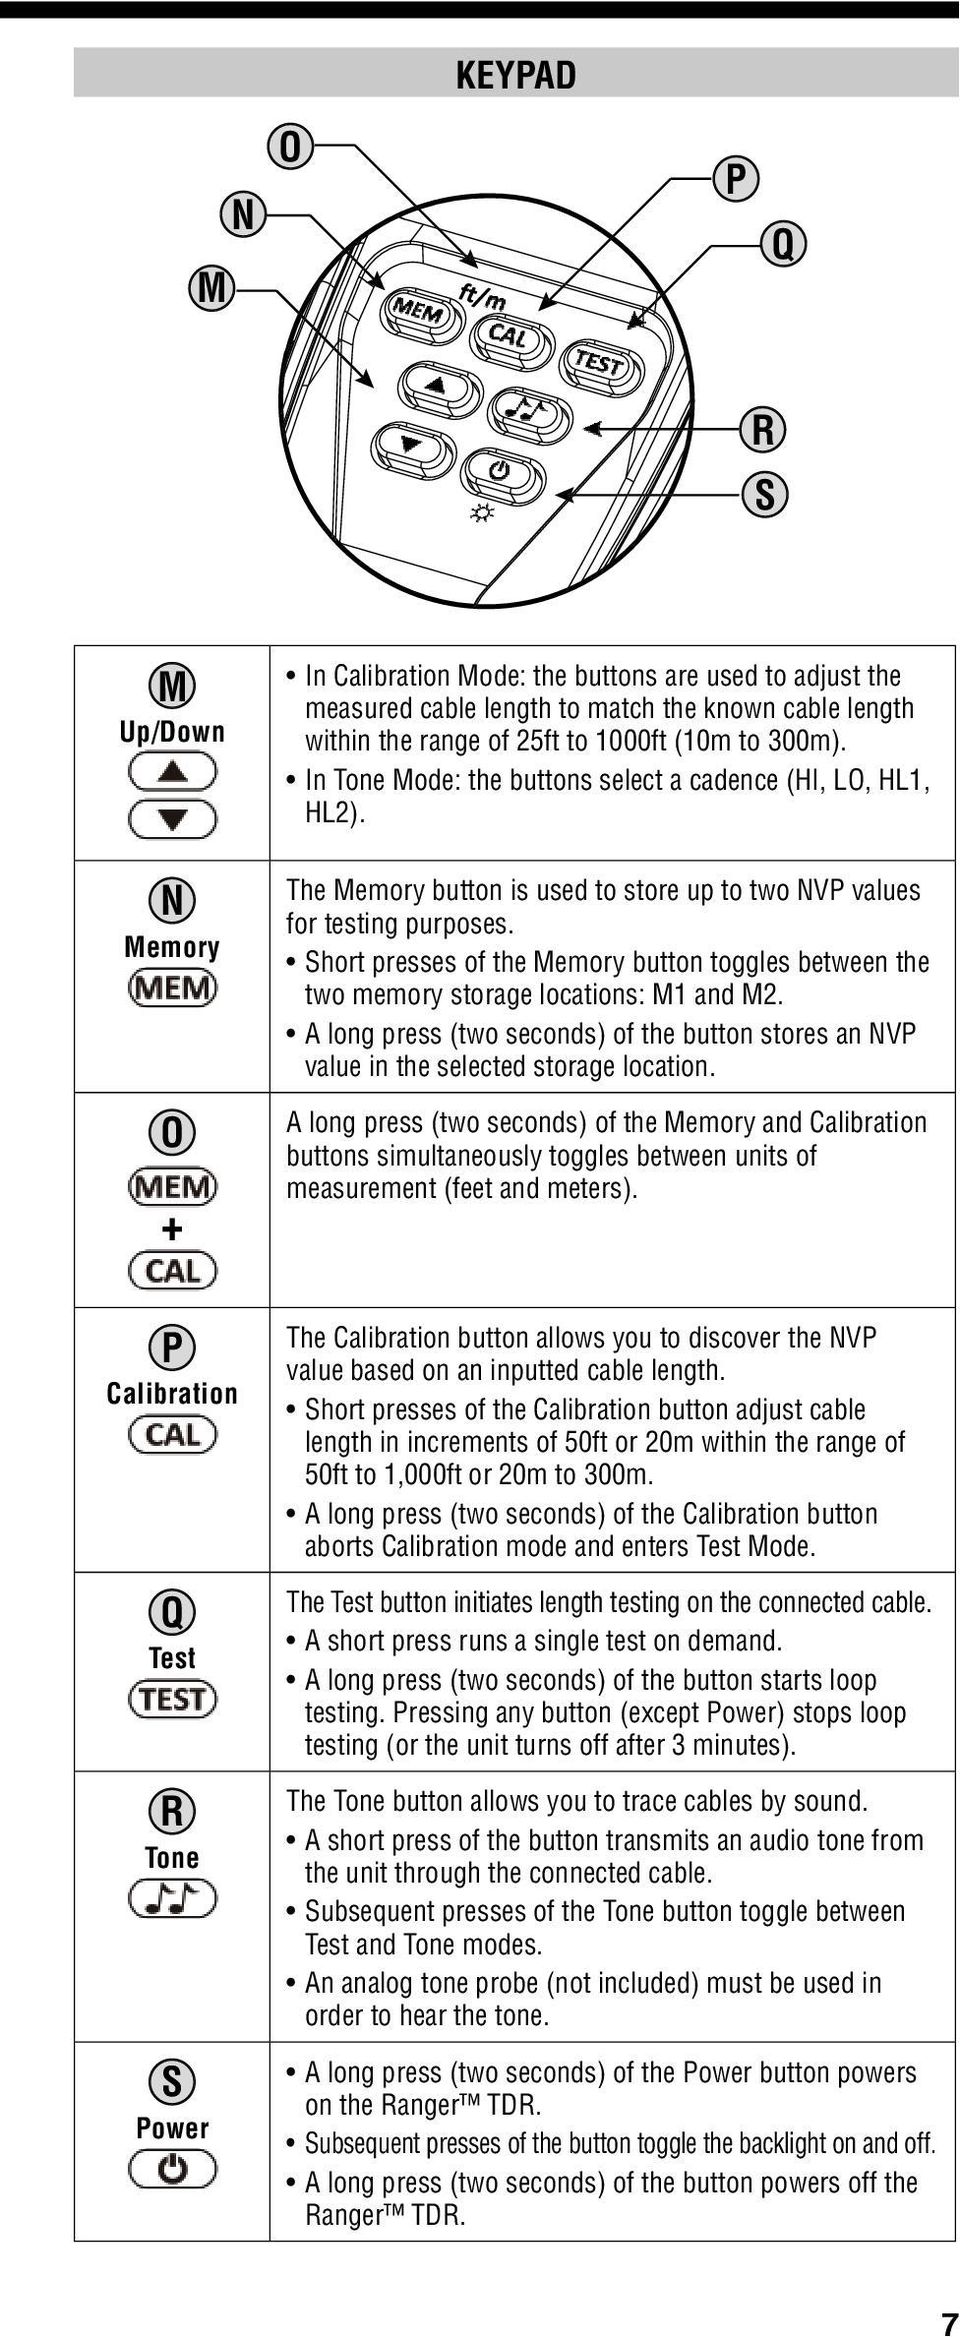 Short presses of the Memory button toggles between the two memory storage locations: M1 and M2. A long press (two seconds) of the button stores an NVP value in the selected storage location.